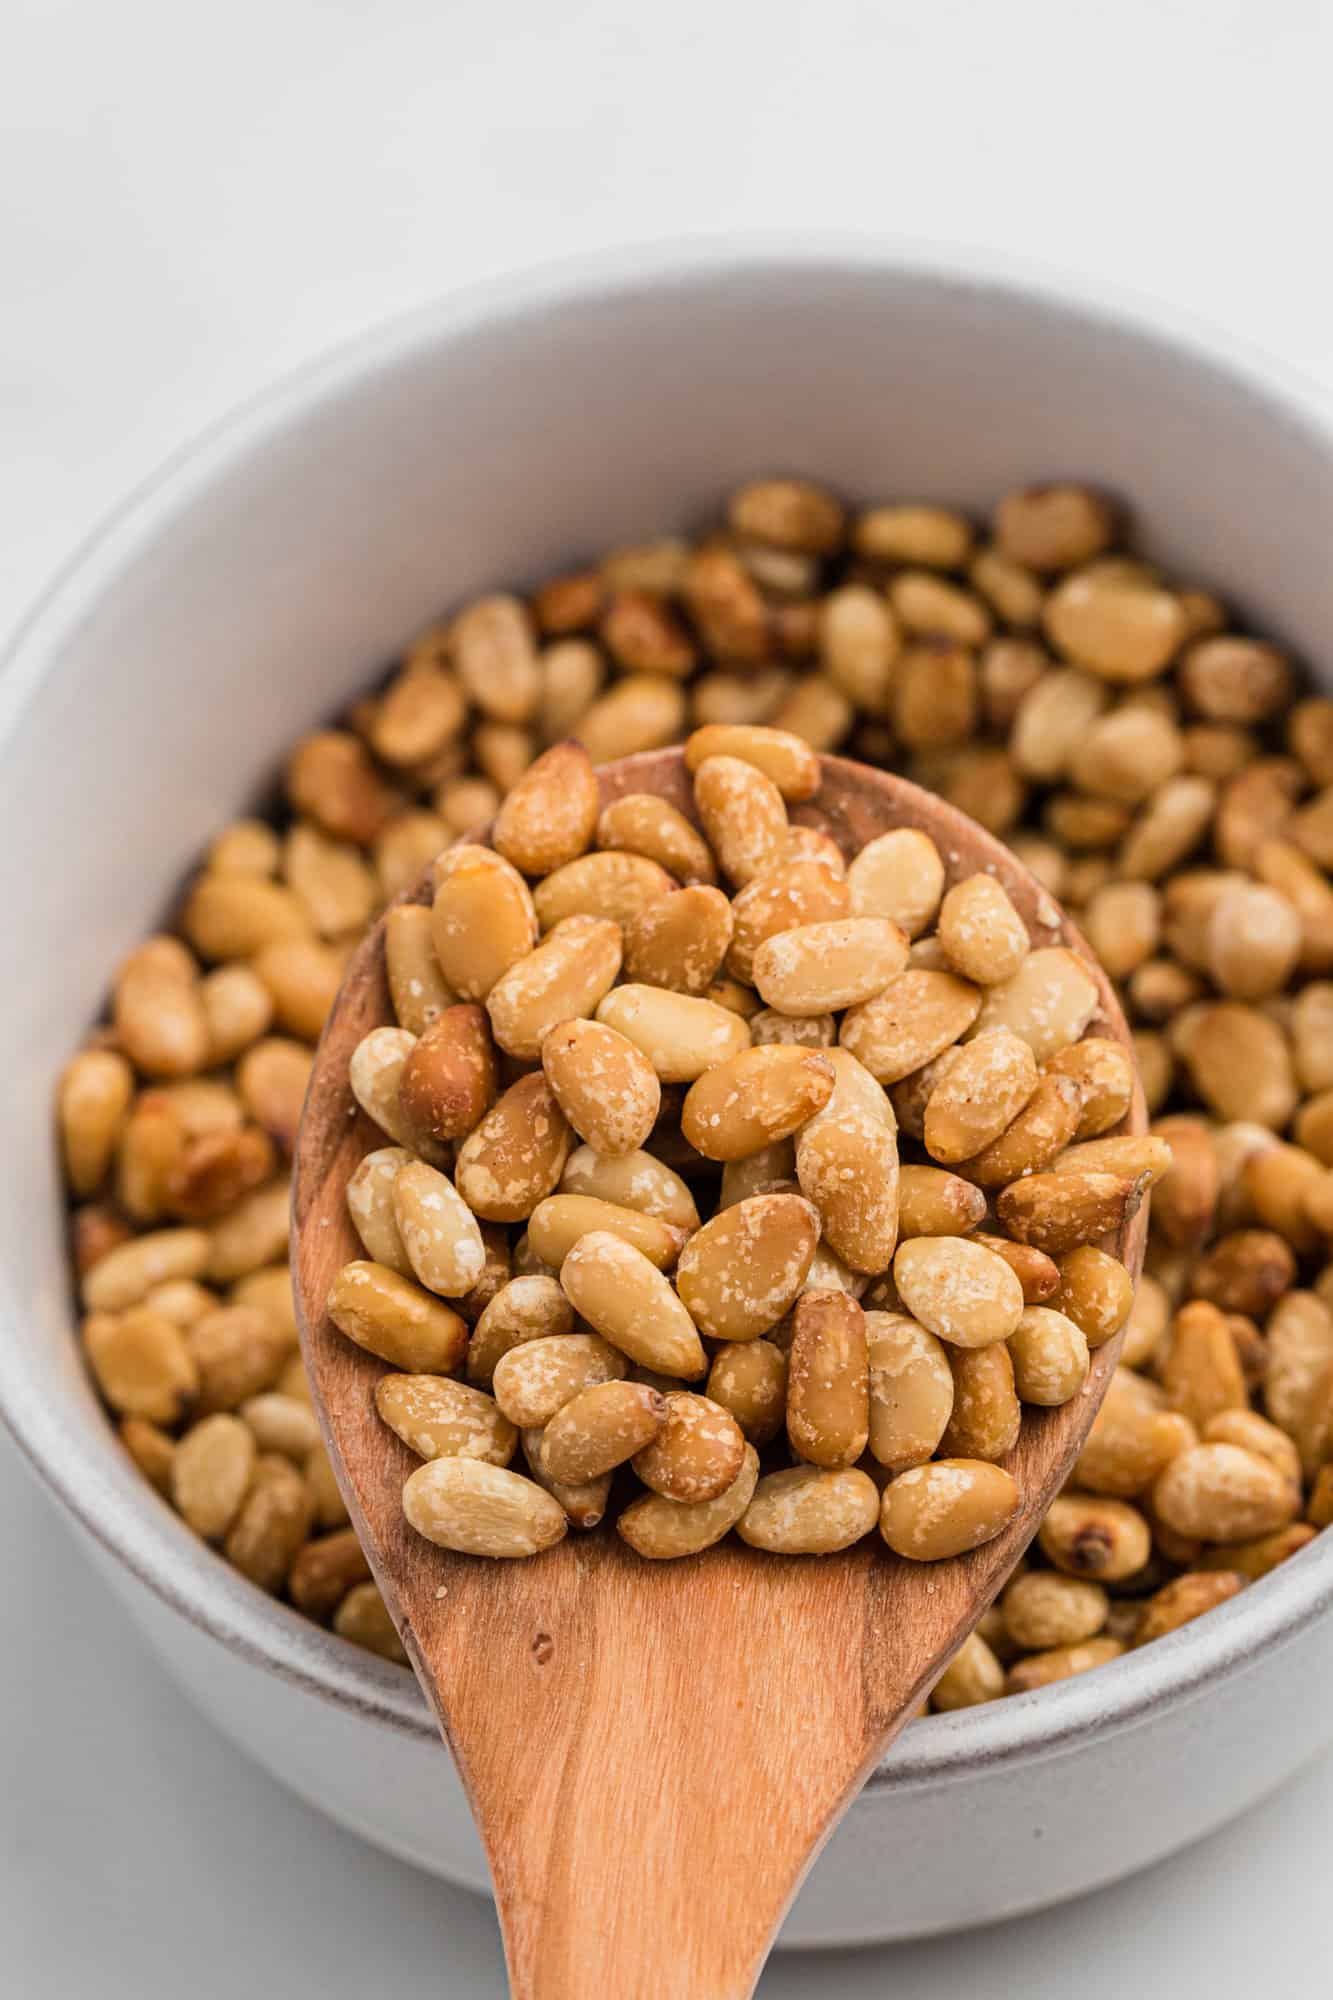 Toasted pine nuts in a small bowl.